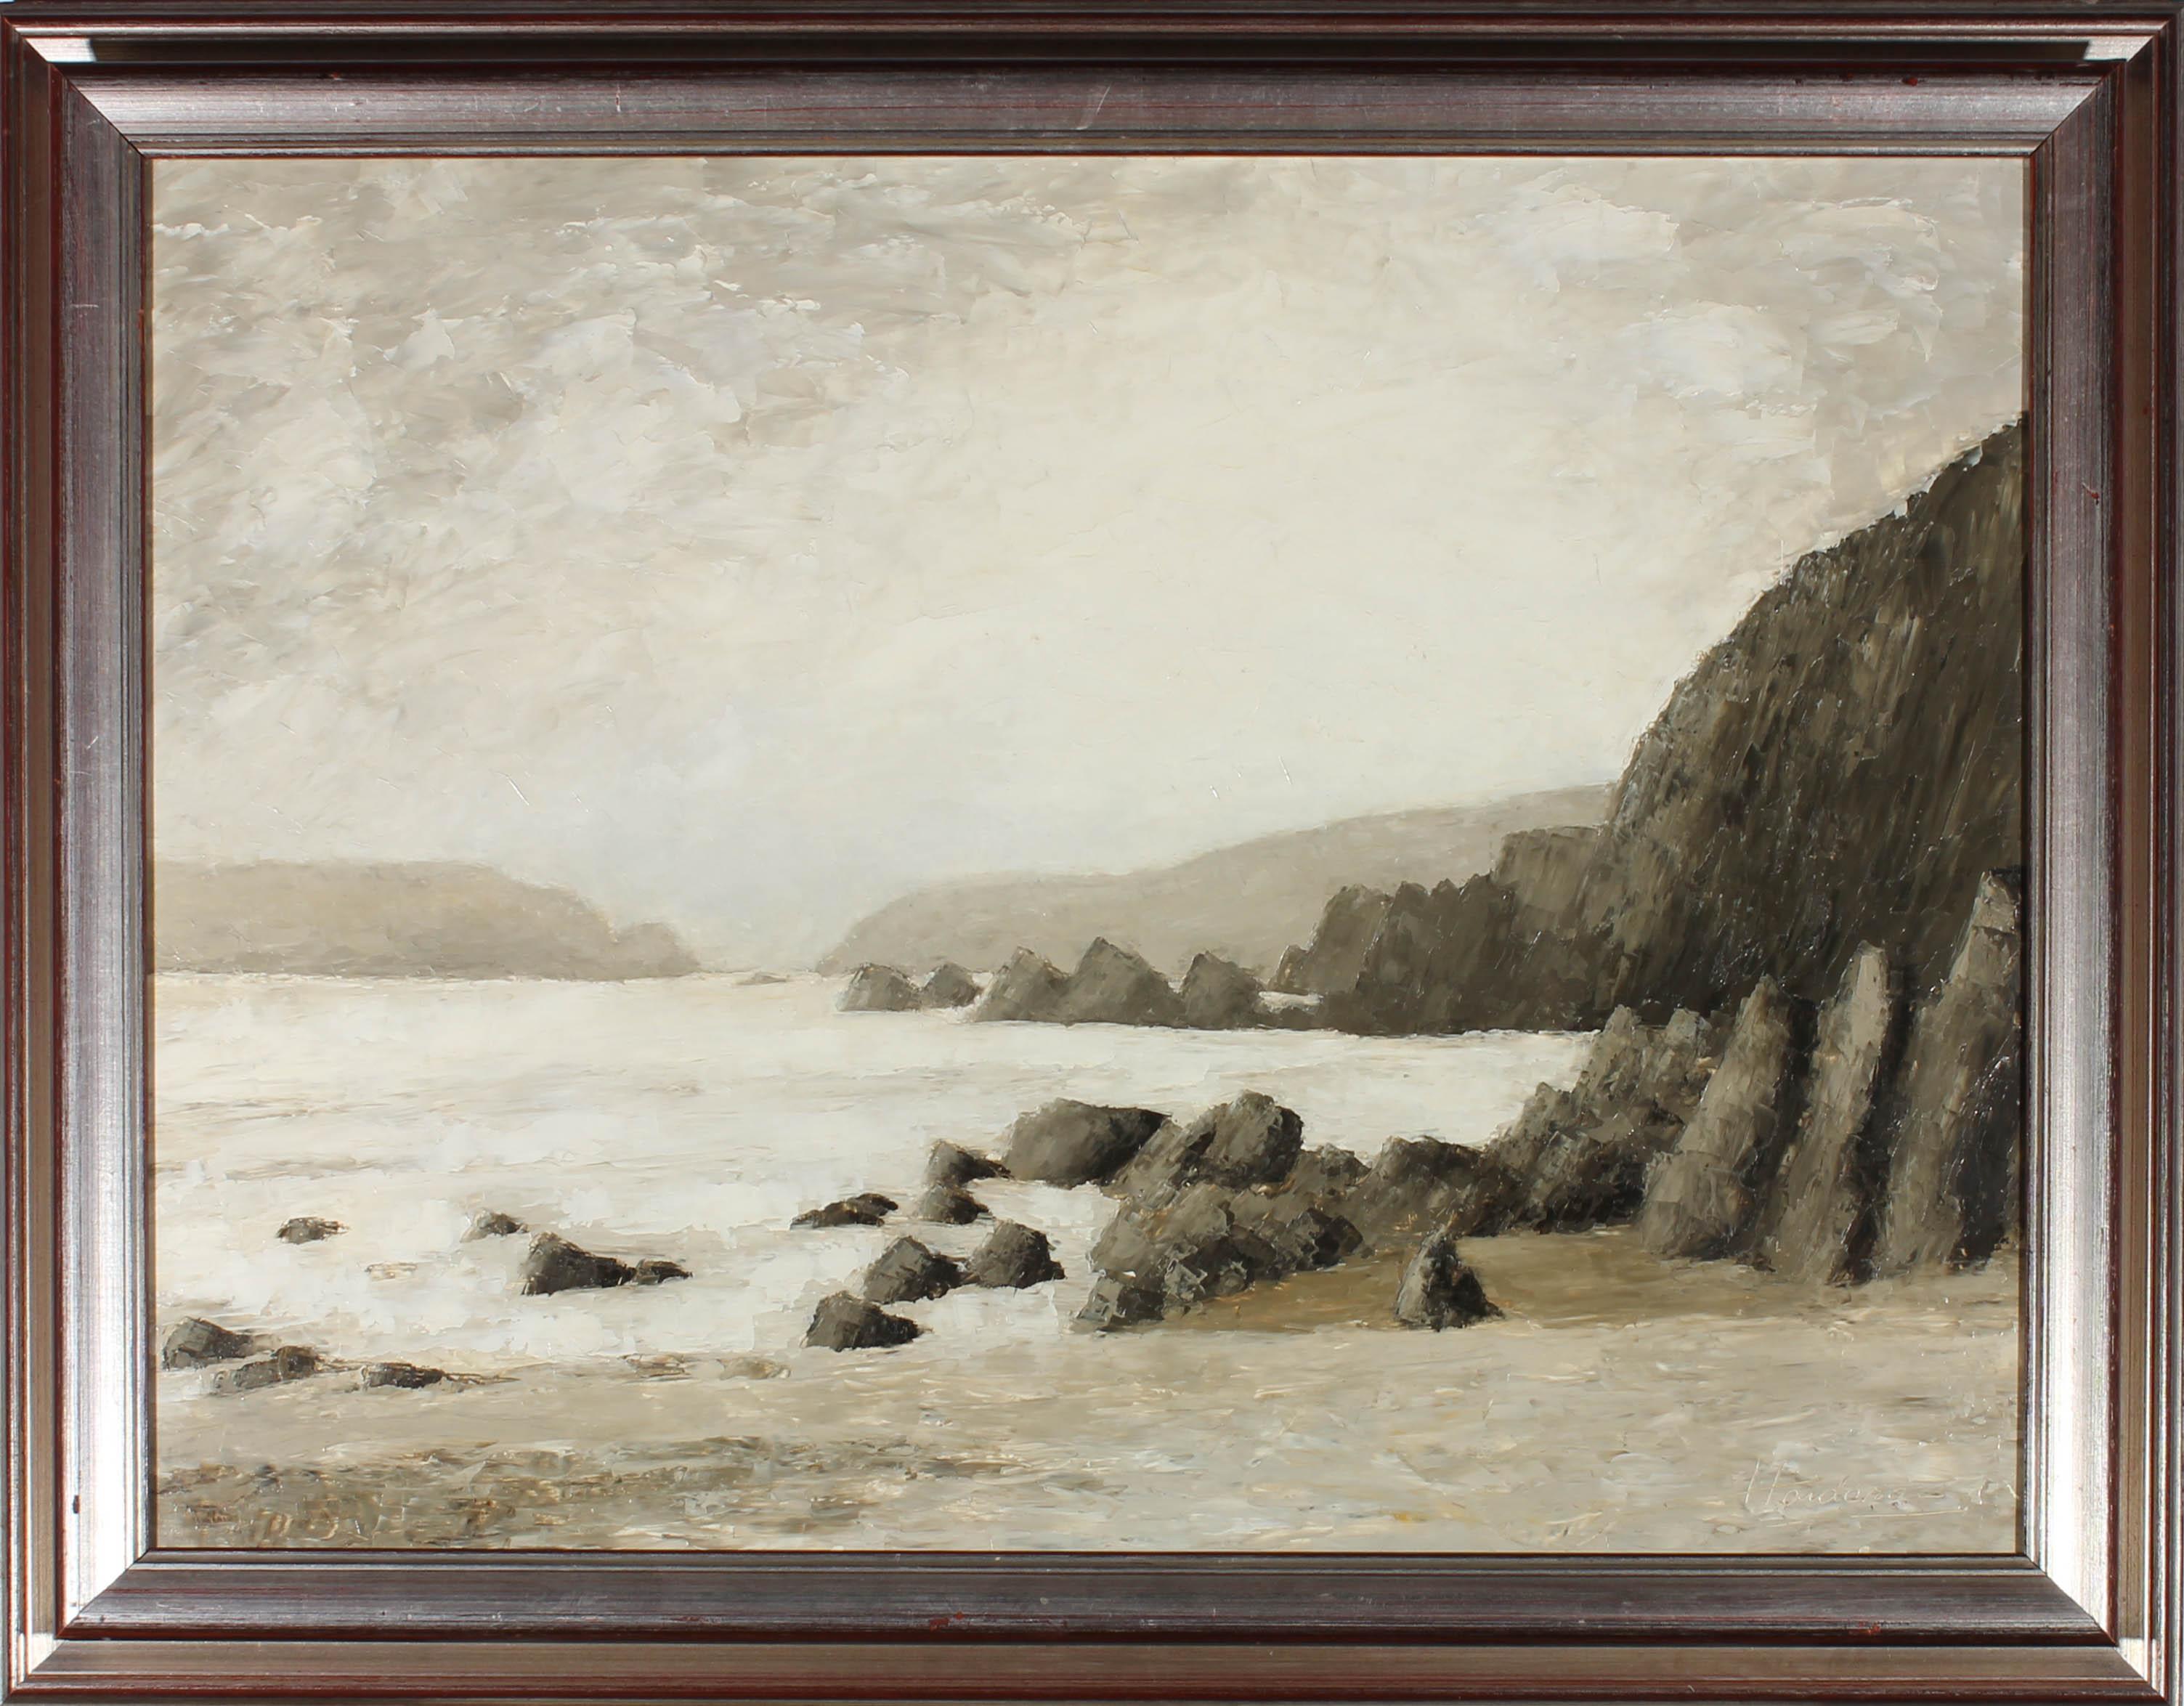 An atmospheric, moody coastal landscape showing monochrome cliffs with jagged rocks on the shore and small white waves rolling among them. The artist has signed to the lower right corner and the painting has been presented in a 20th Century silvered